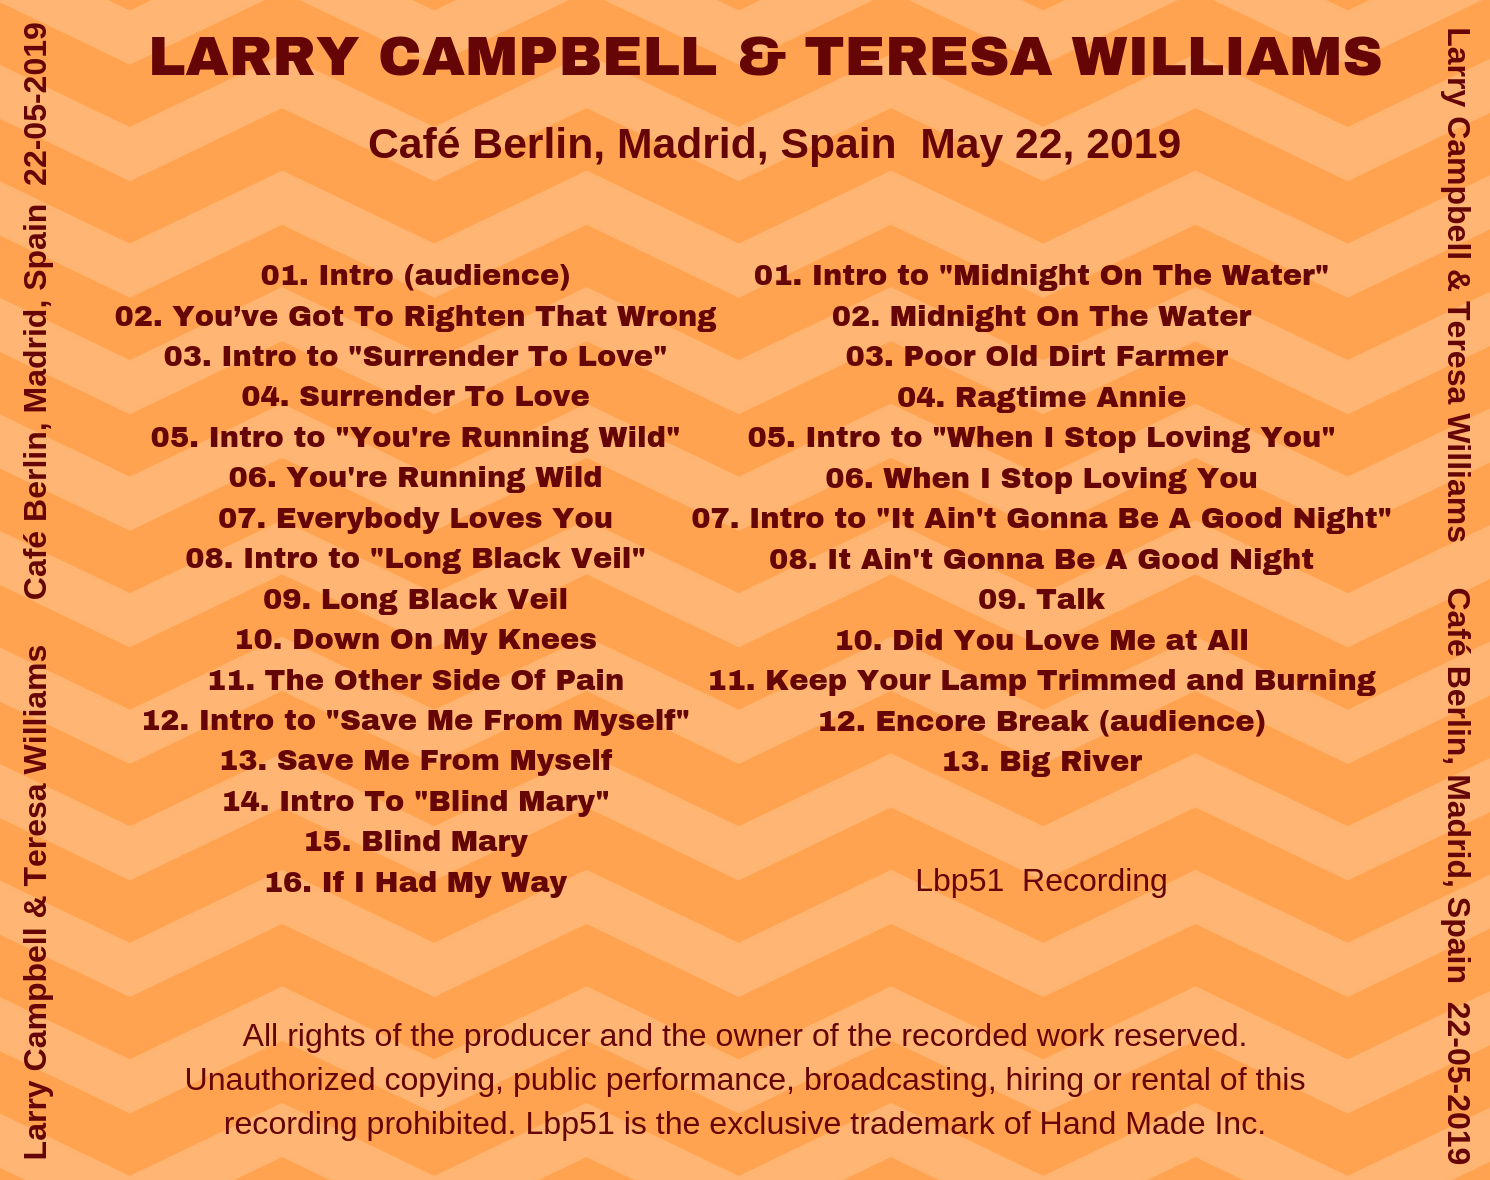 LarryCampbellTeresaWilliams2019-05-22CafeBerlinMadridSpain (1).png